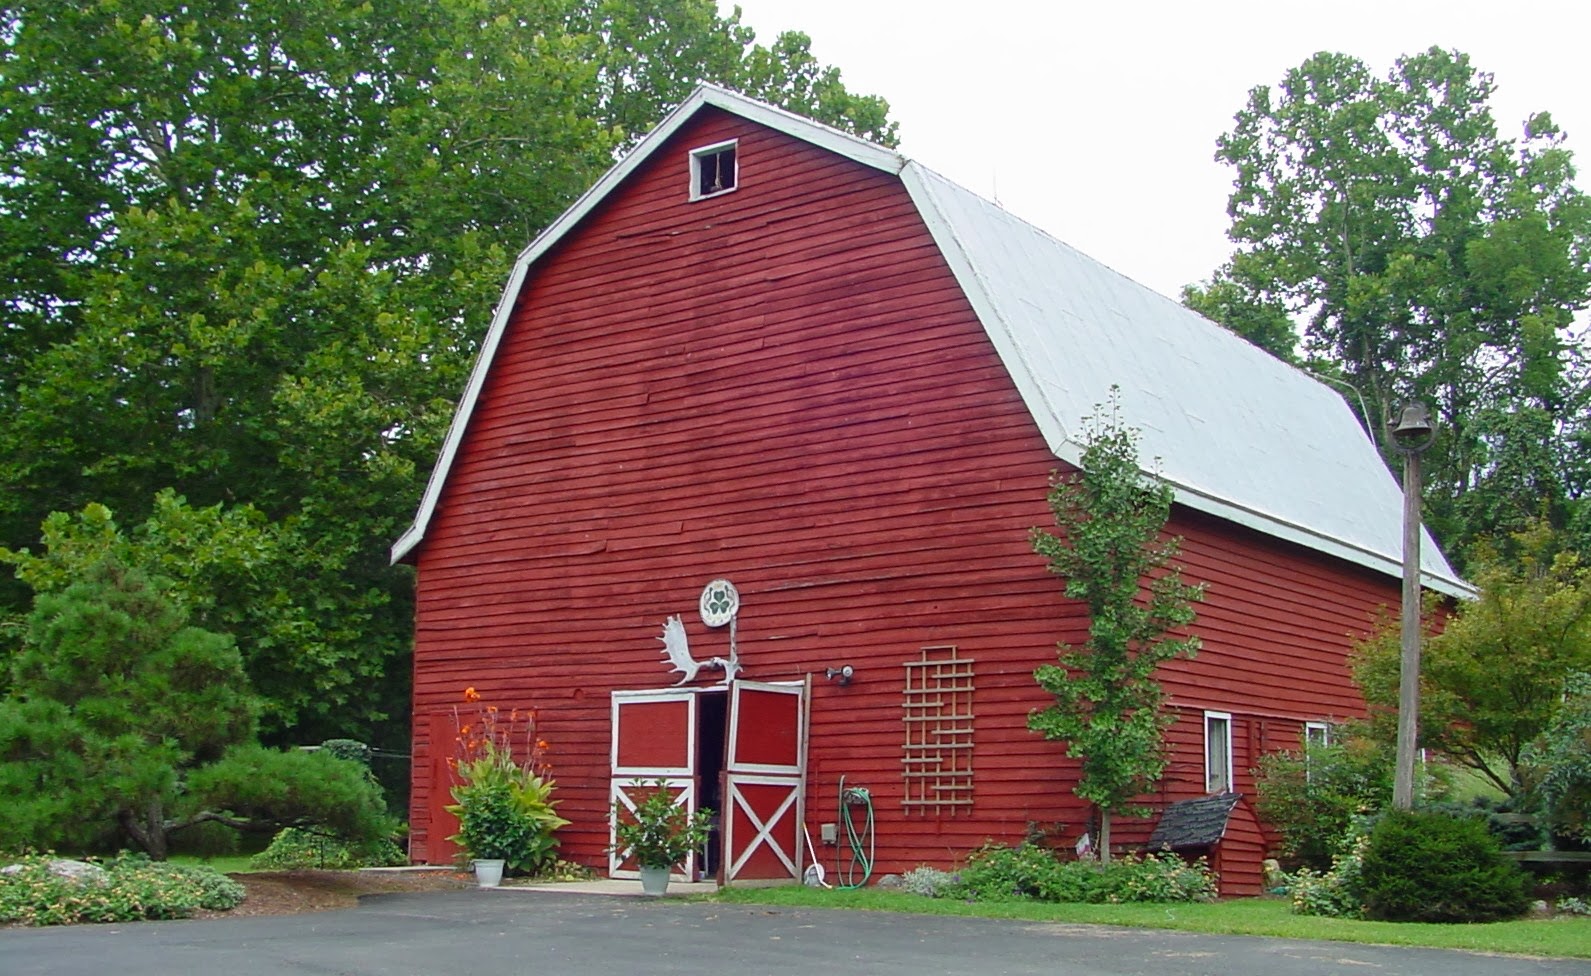 The  Red Barn owned by my neighbors, Earl and Emily Chilton